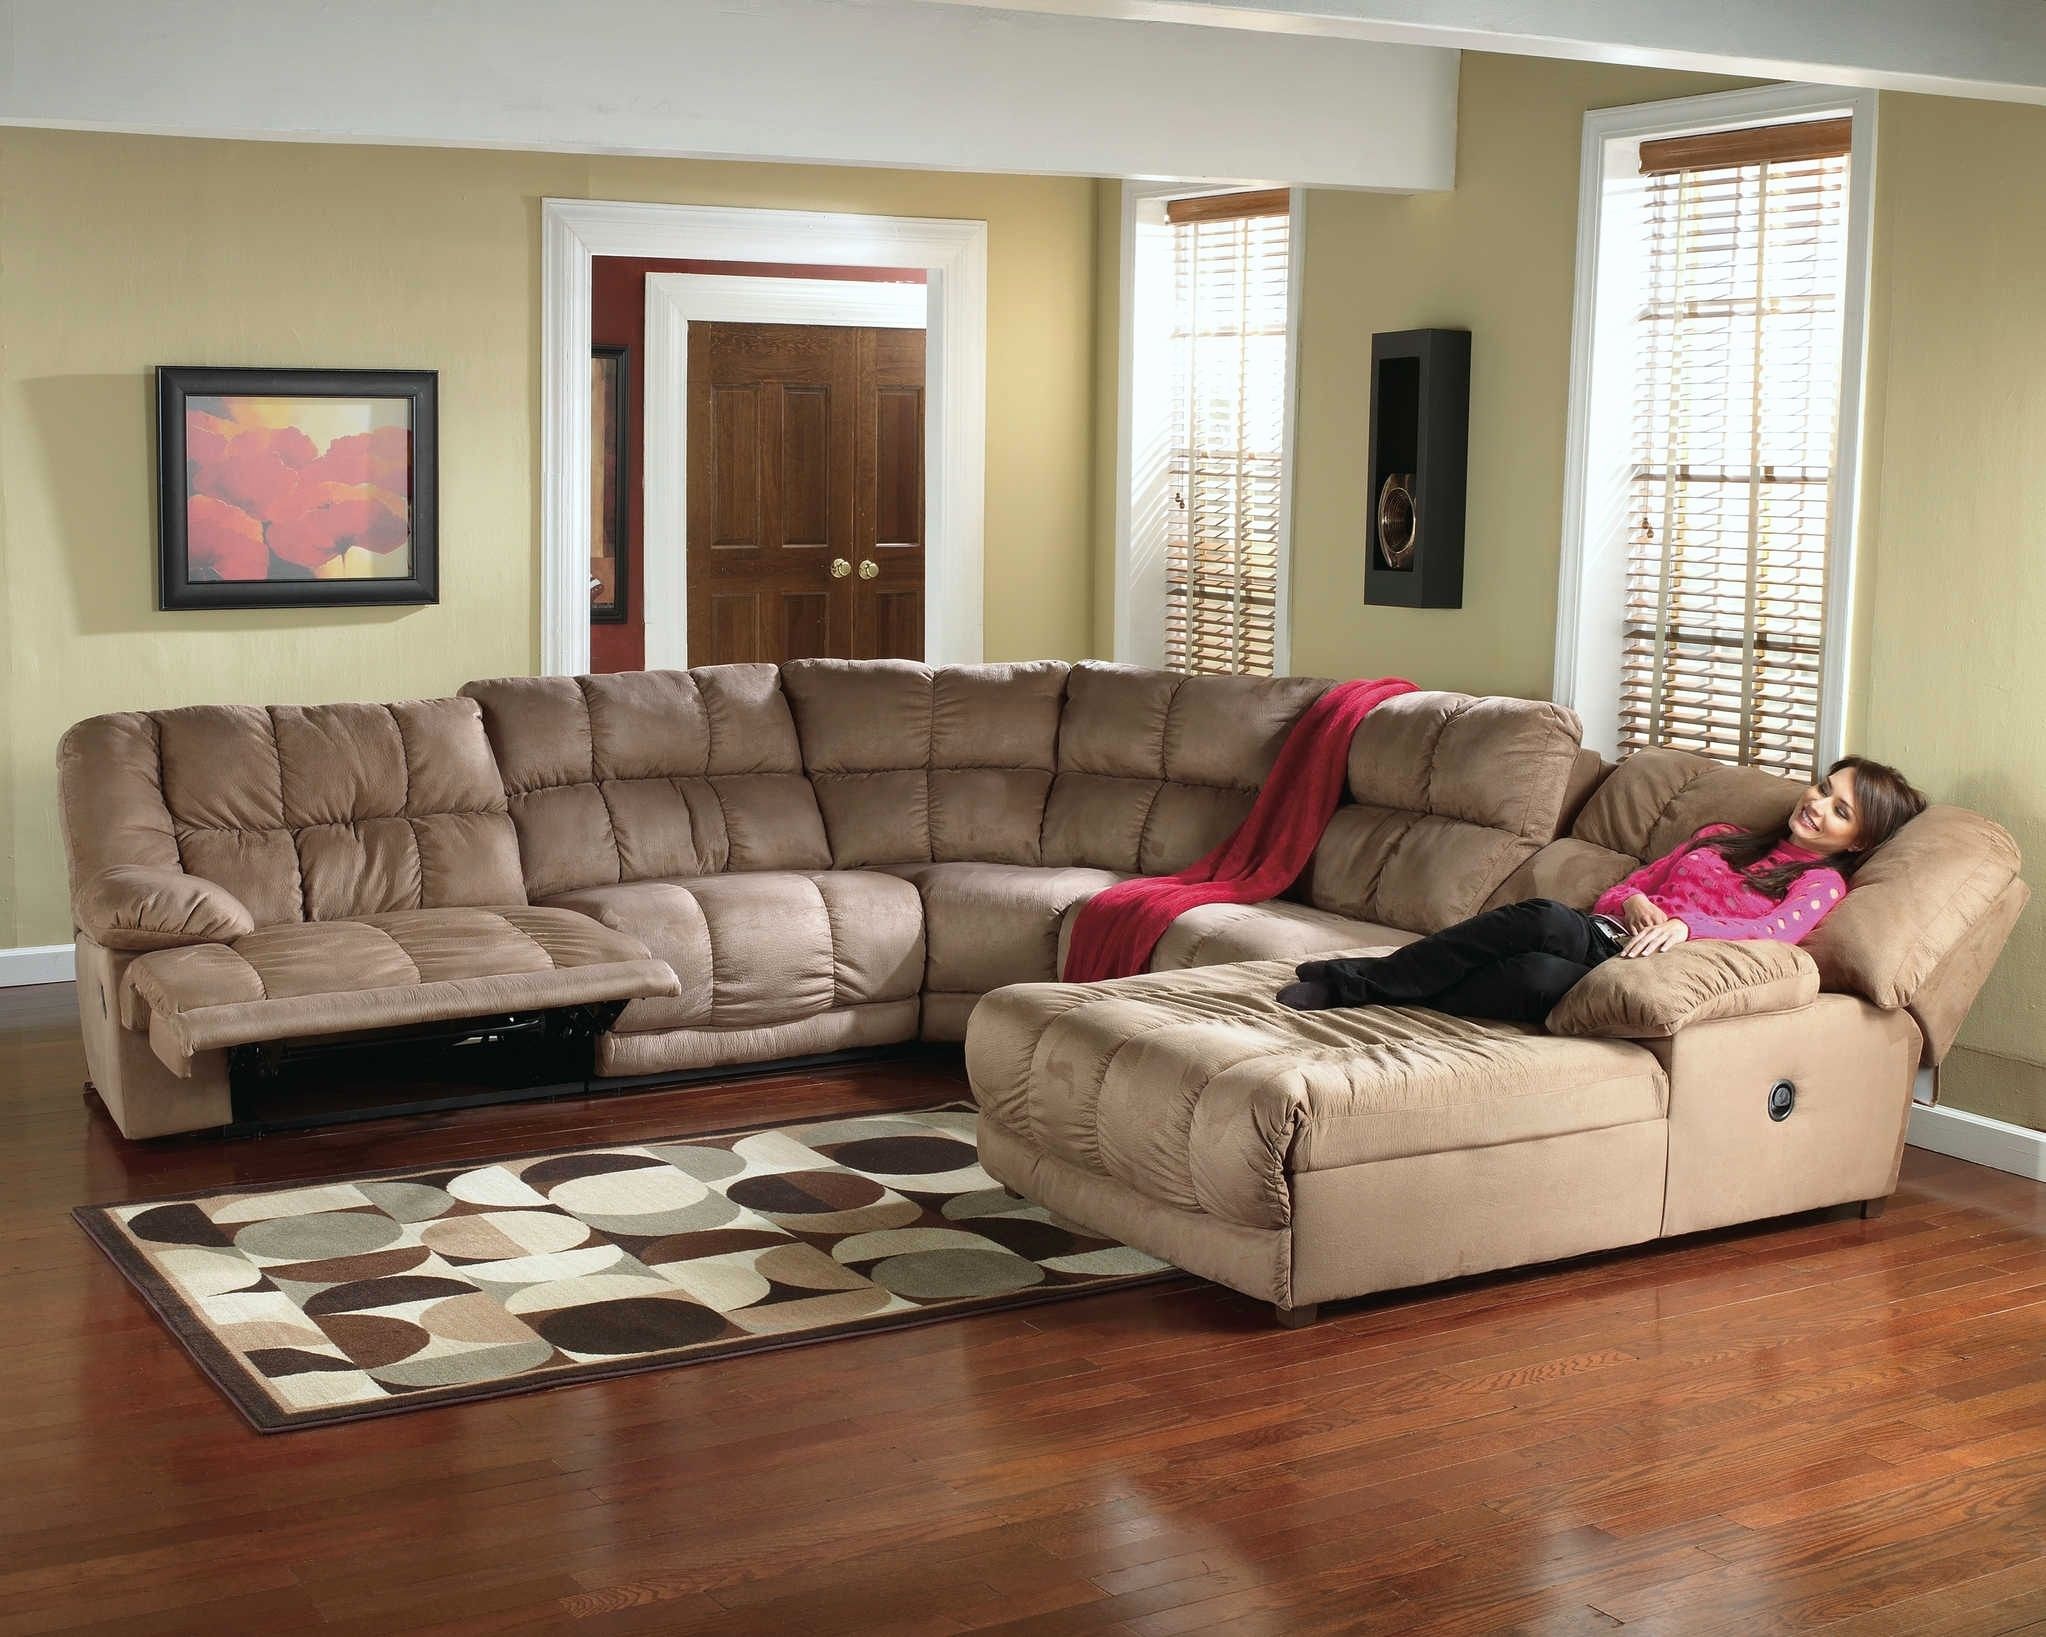 Lovely Apartment Size Reclining Sectional 2018 Couches And Sofas Ideas For Las Vegas Sectional Sofas 